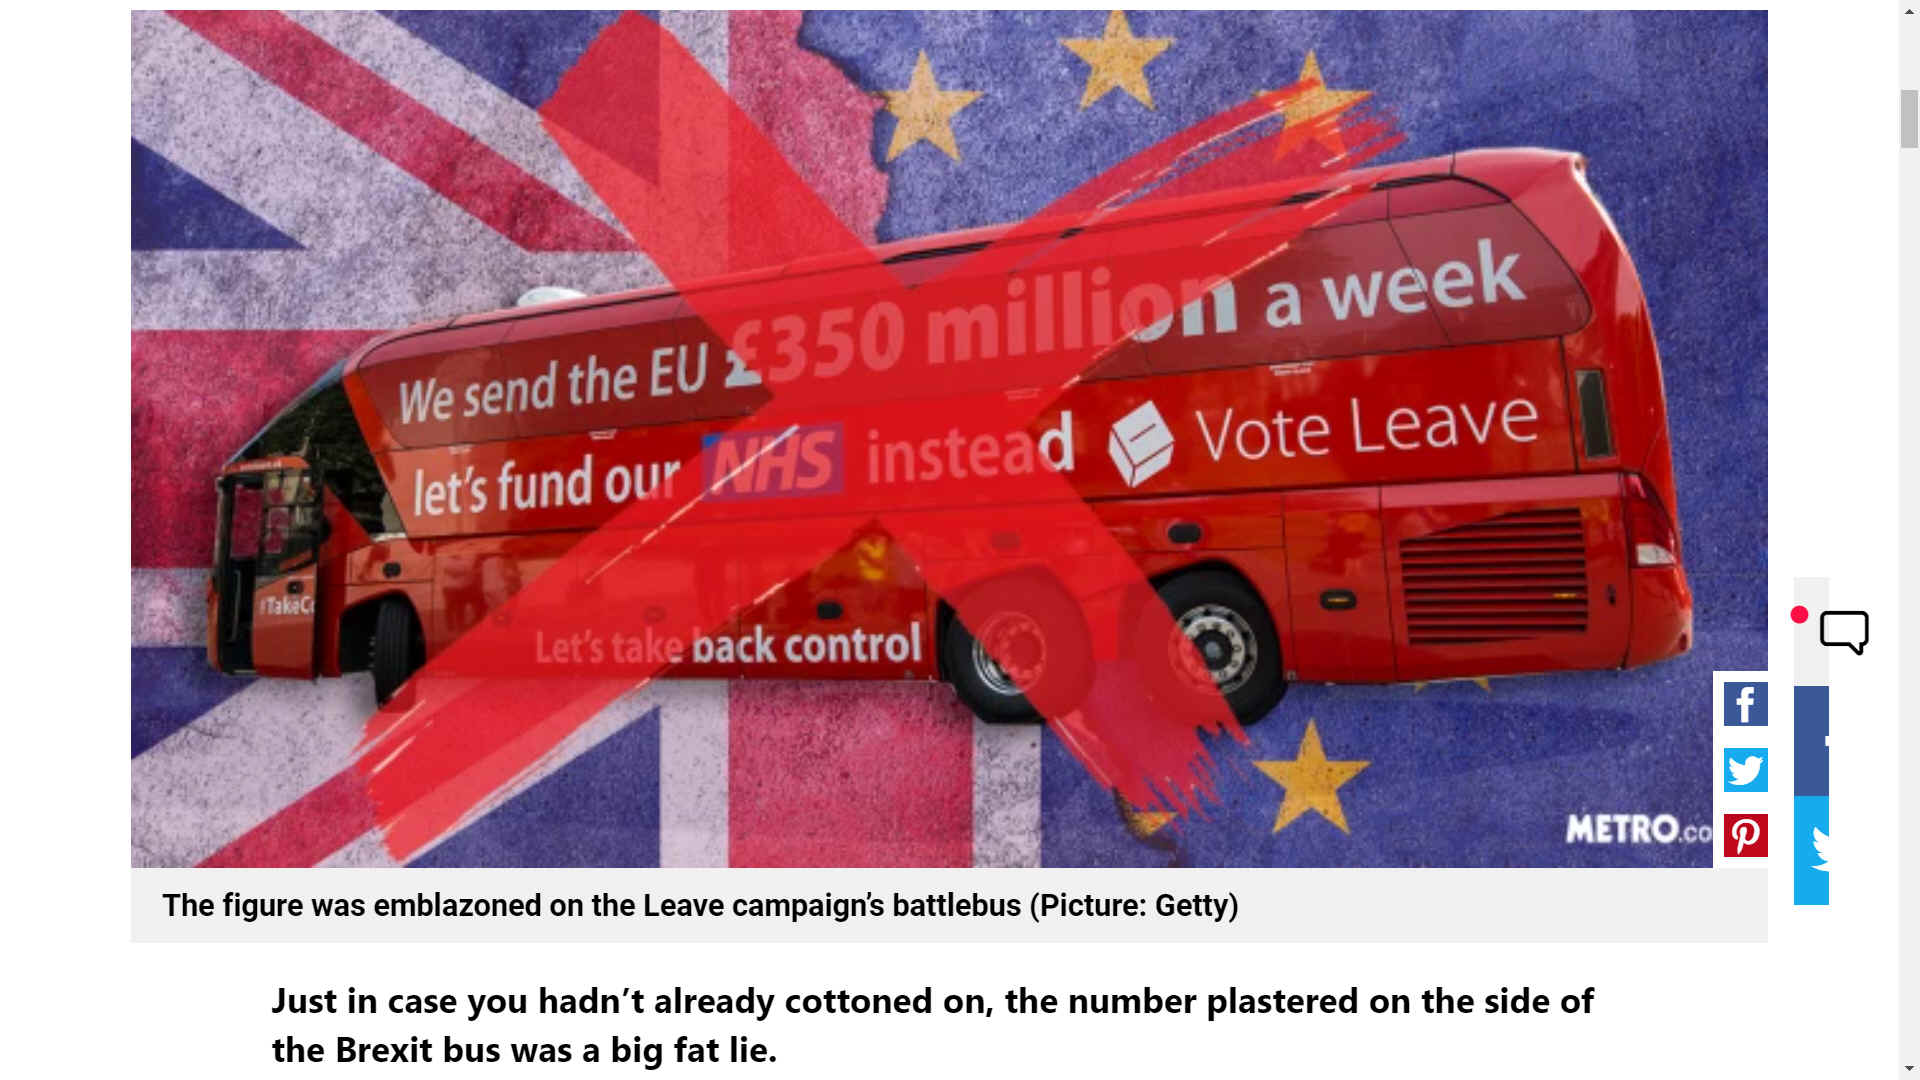 Another big fat lie from Boris Johnson red bus campaign